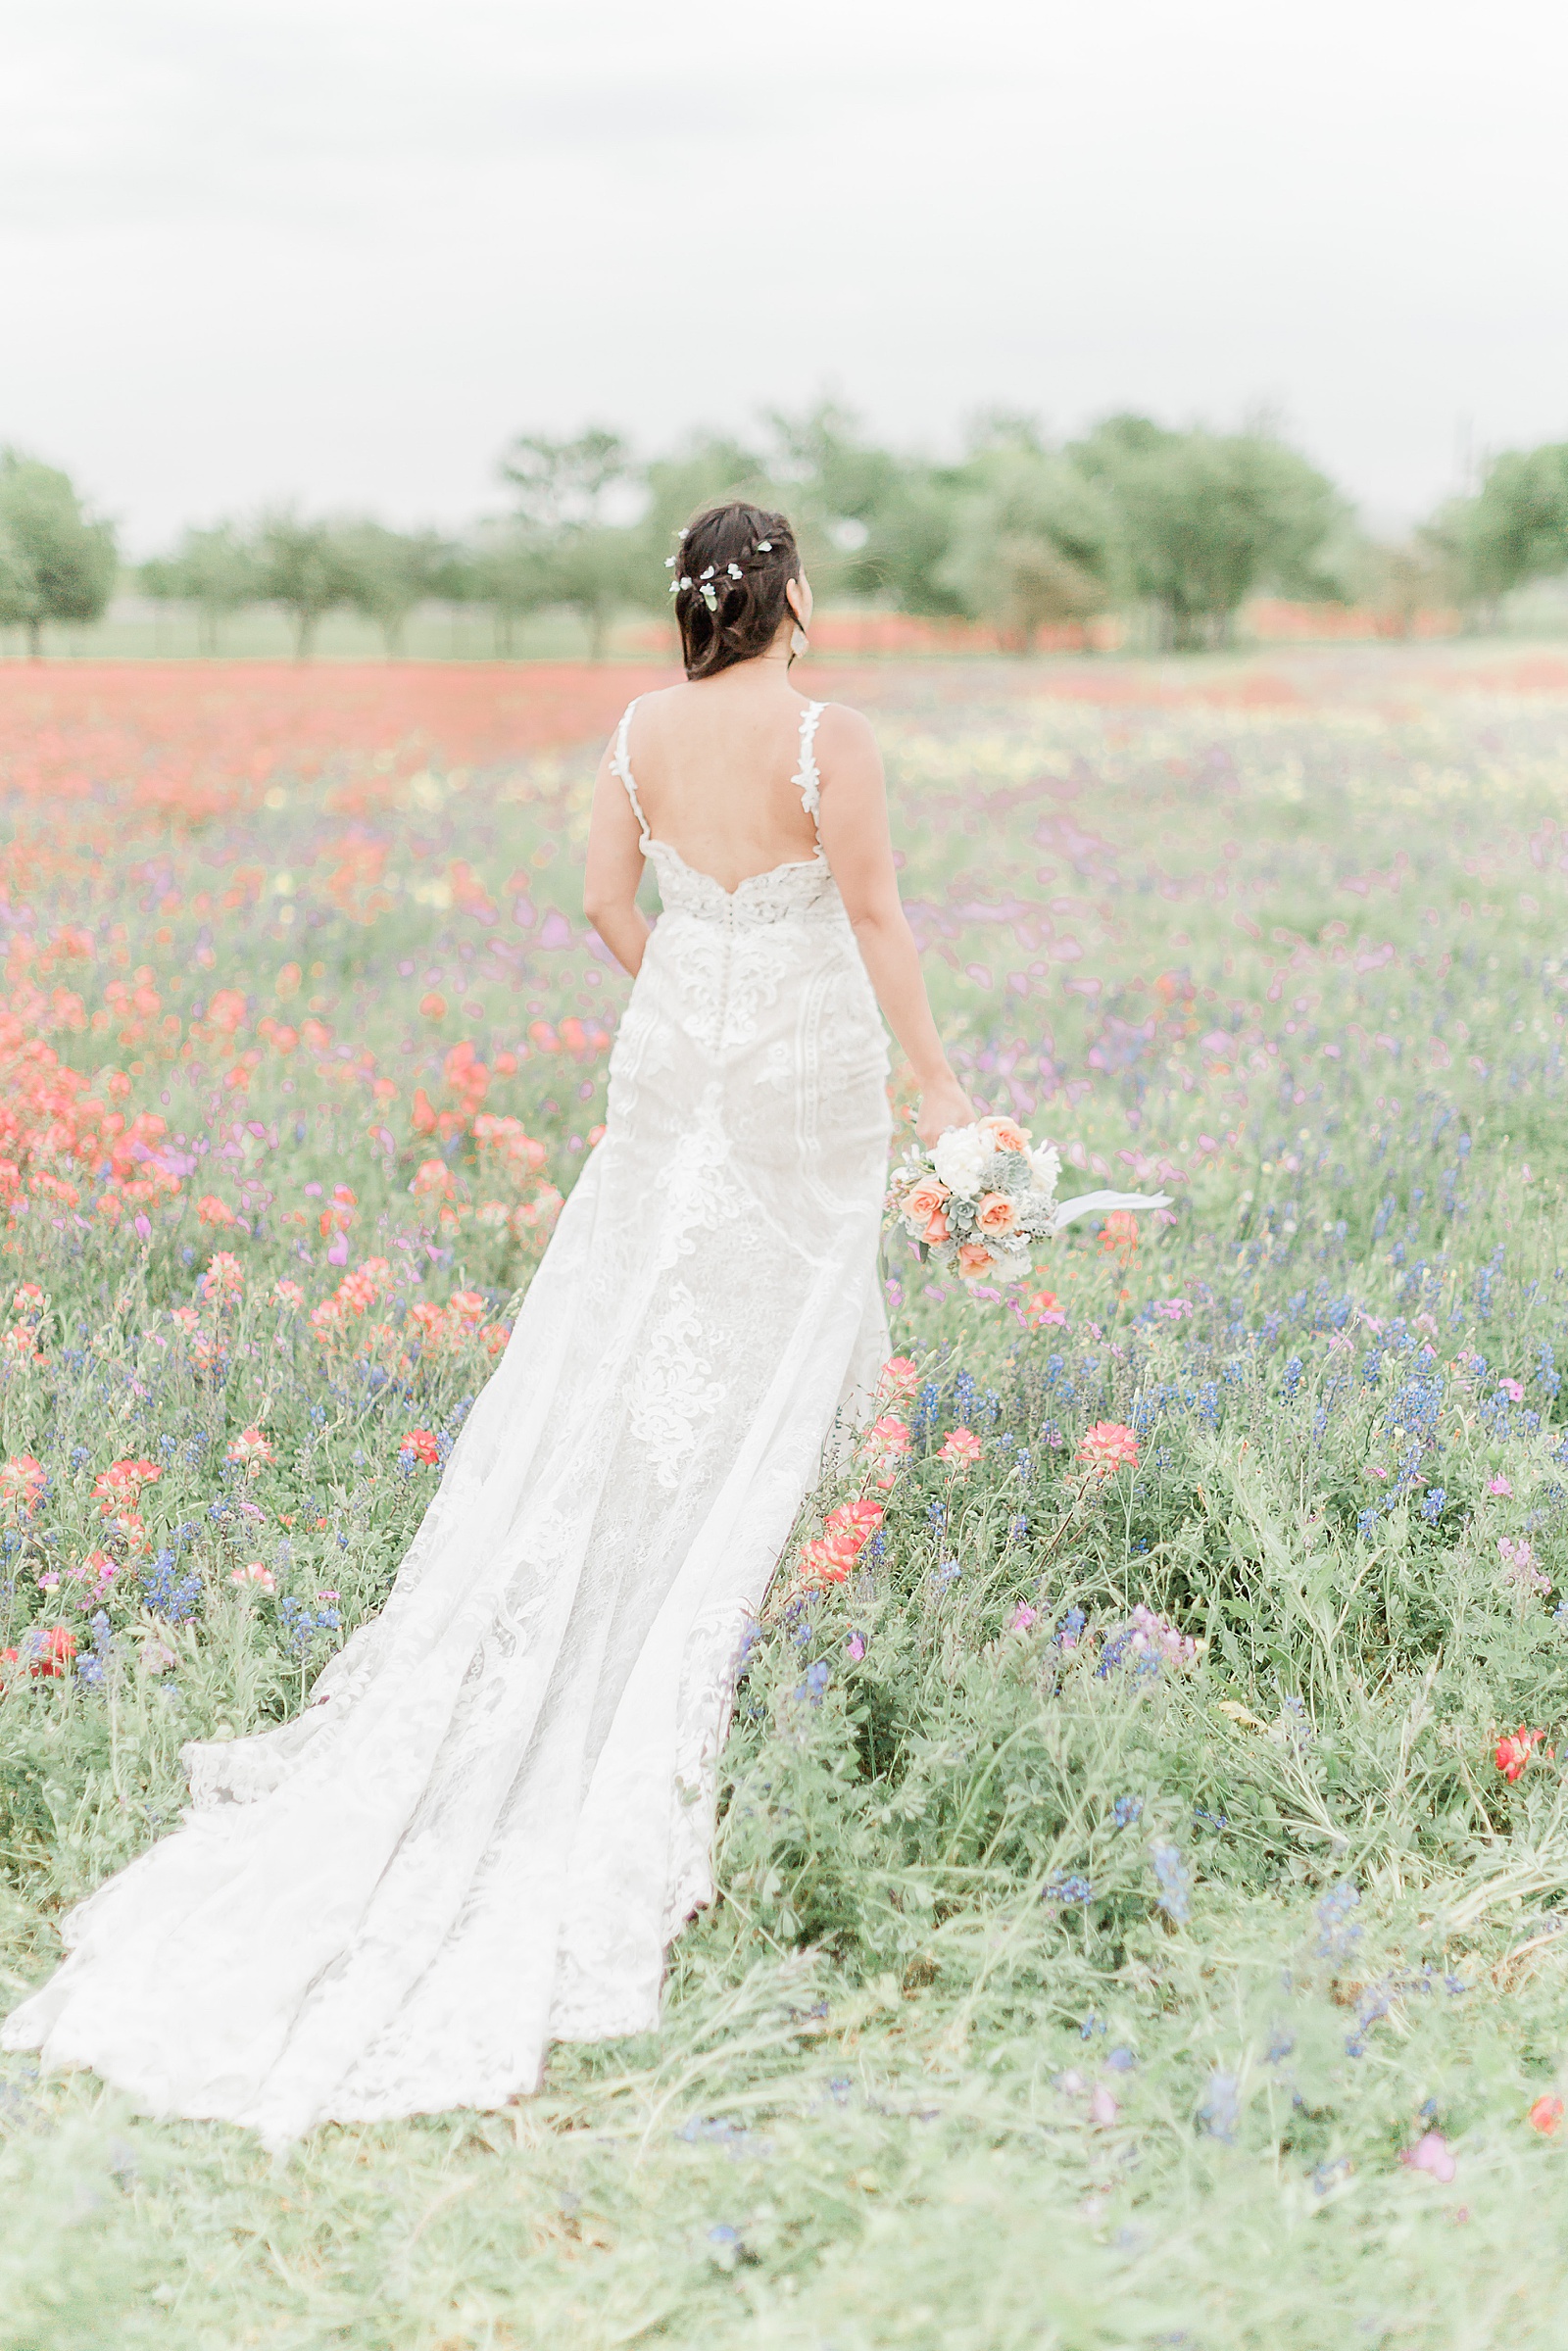 Lace Wedding Gown Bridals by Anna Kay Photography, Destination Wedding Photographer